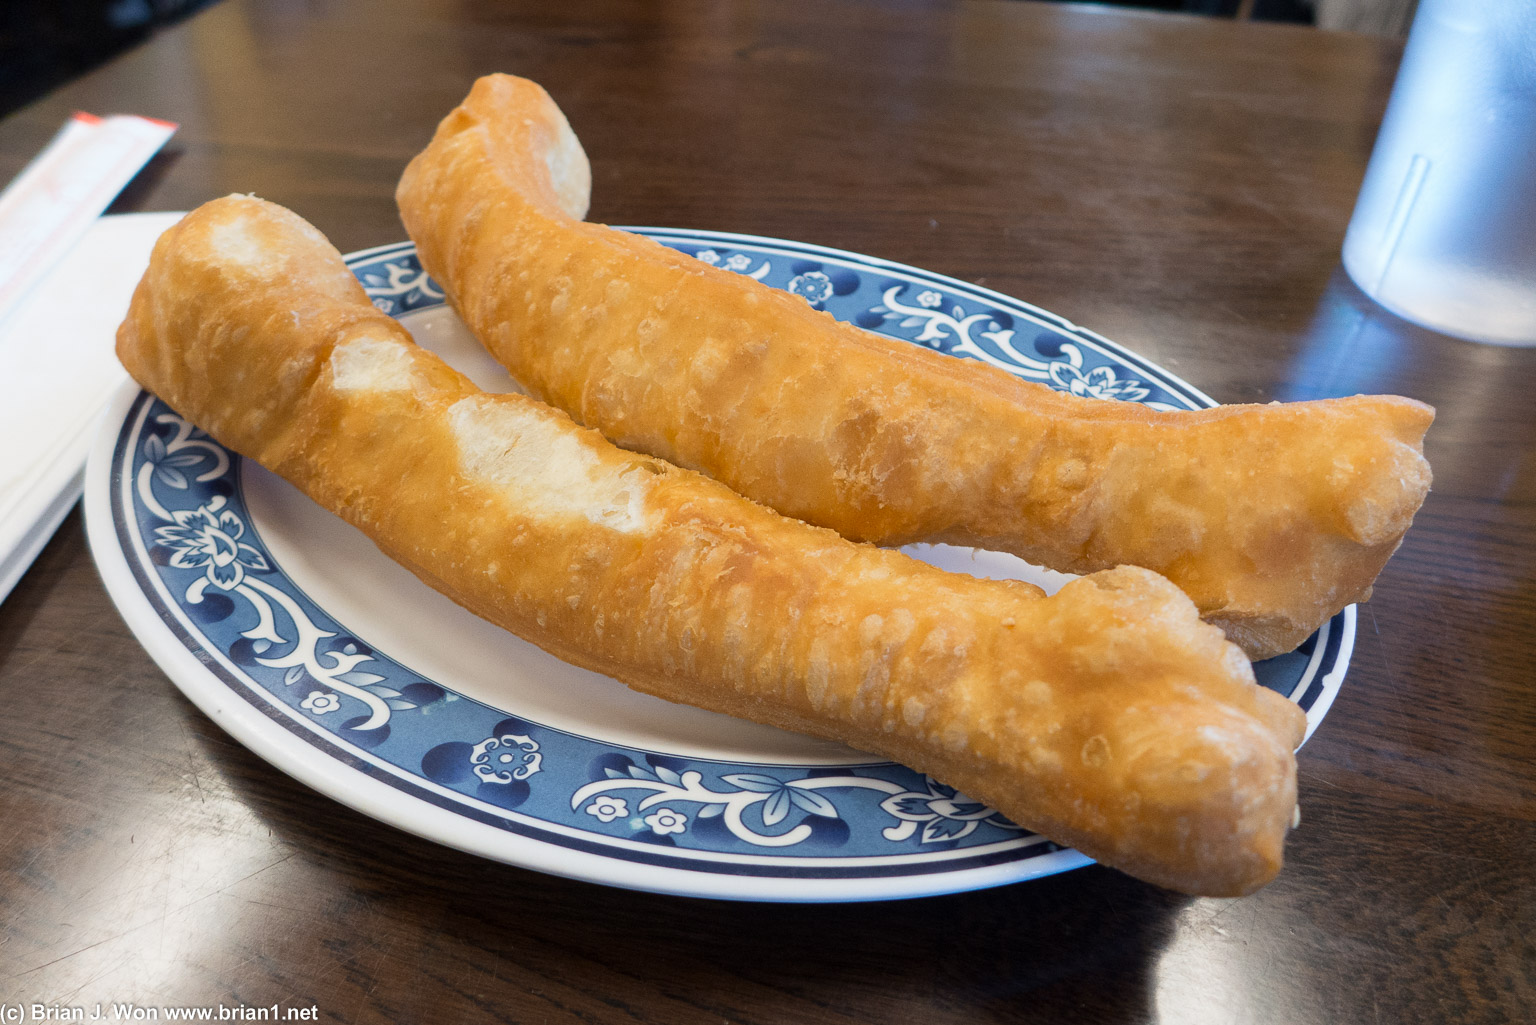 Deep fried breadsticks. Quite good. Heavier than the Chinese yeow teow, much closer to normal white bread.